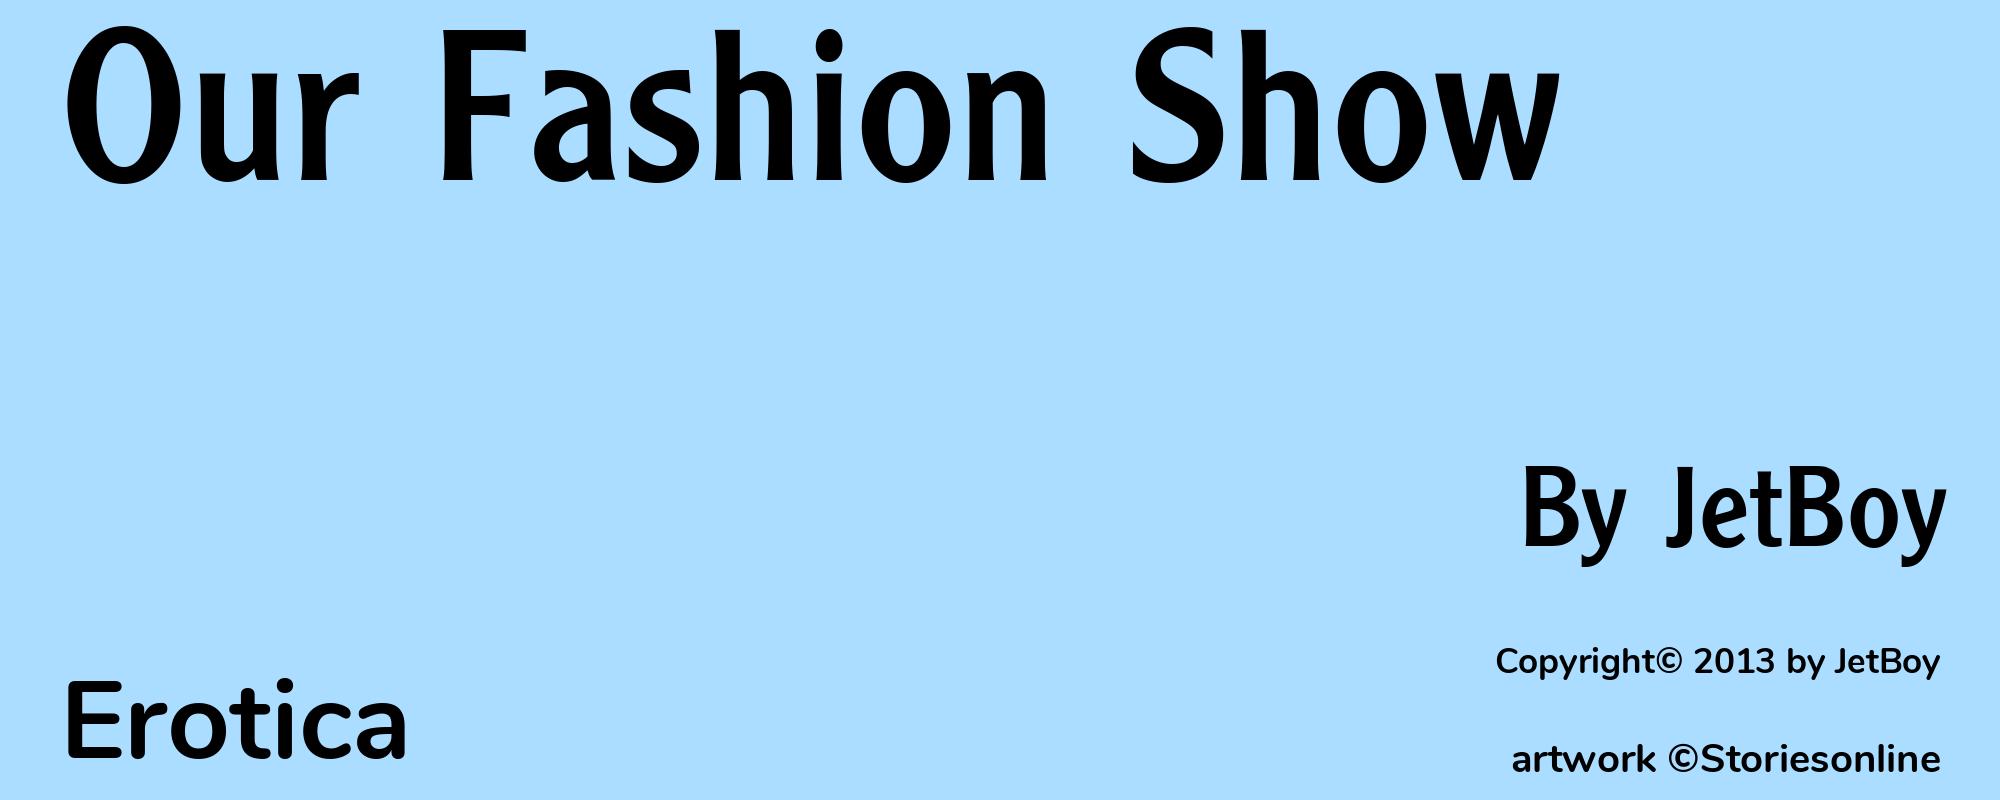 Our Fashion Show - Cover